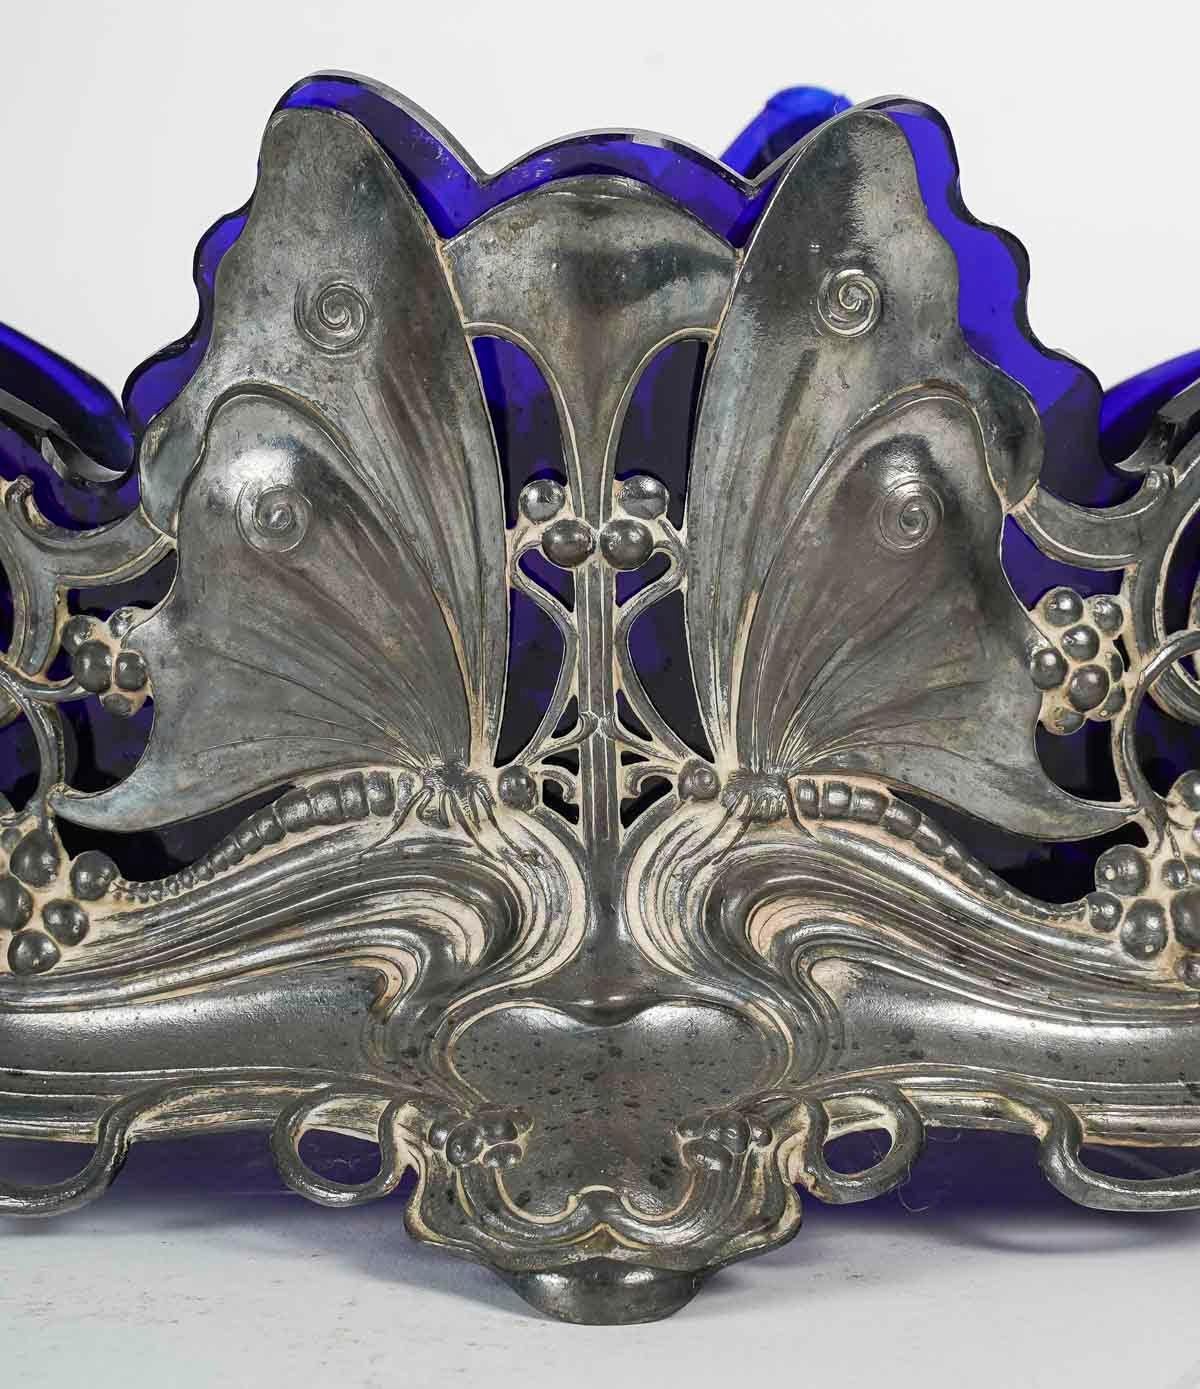 Art Nouveau goblet, Circa 1900, Floral and butterfly design.

An Art Nouveau pewter and blue crystal bowl with butterfly and floral decorations, Circa 1900.
h: 20cm, w: 40cm, d: 18cm